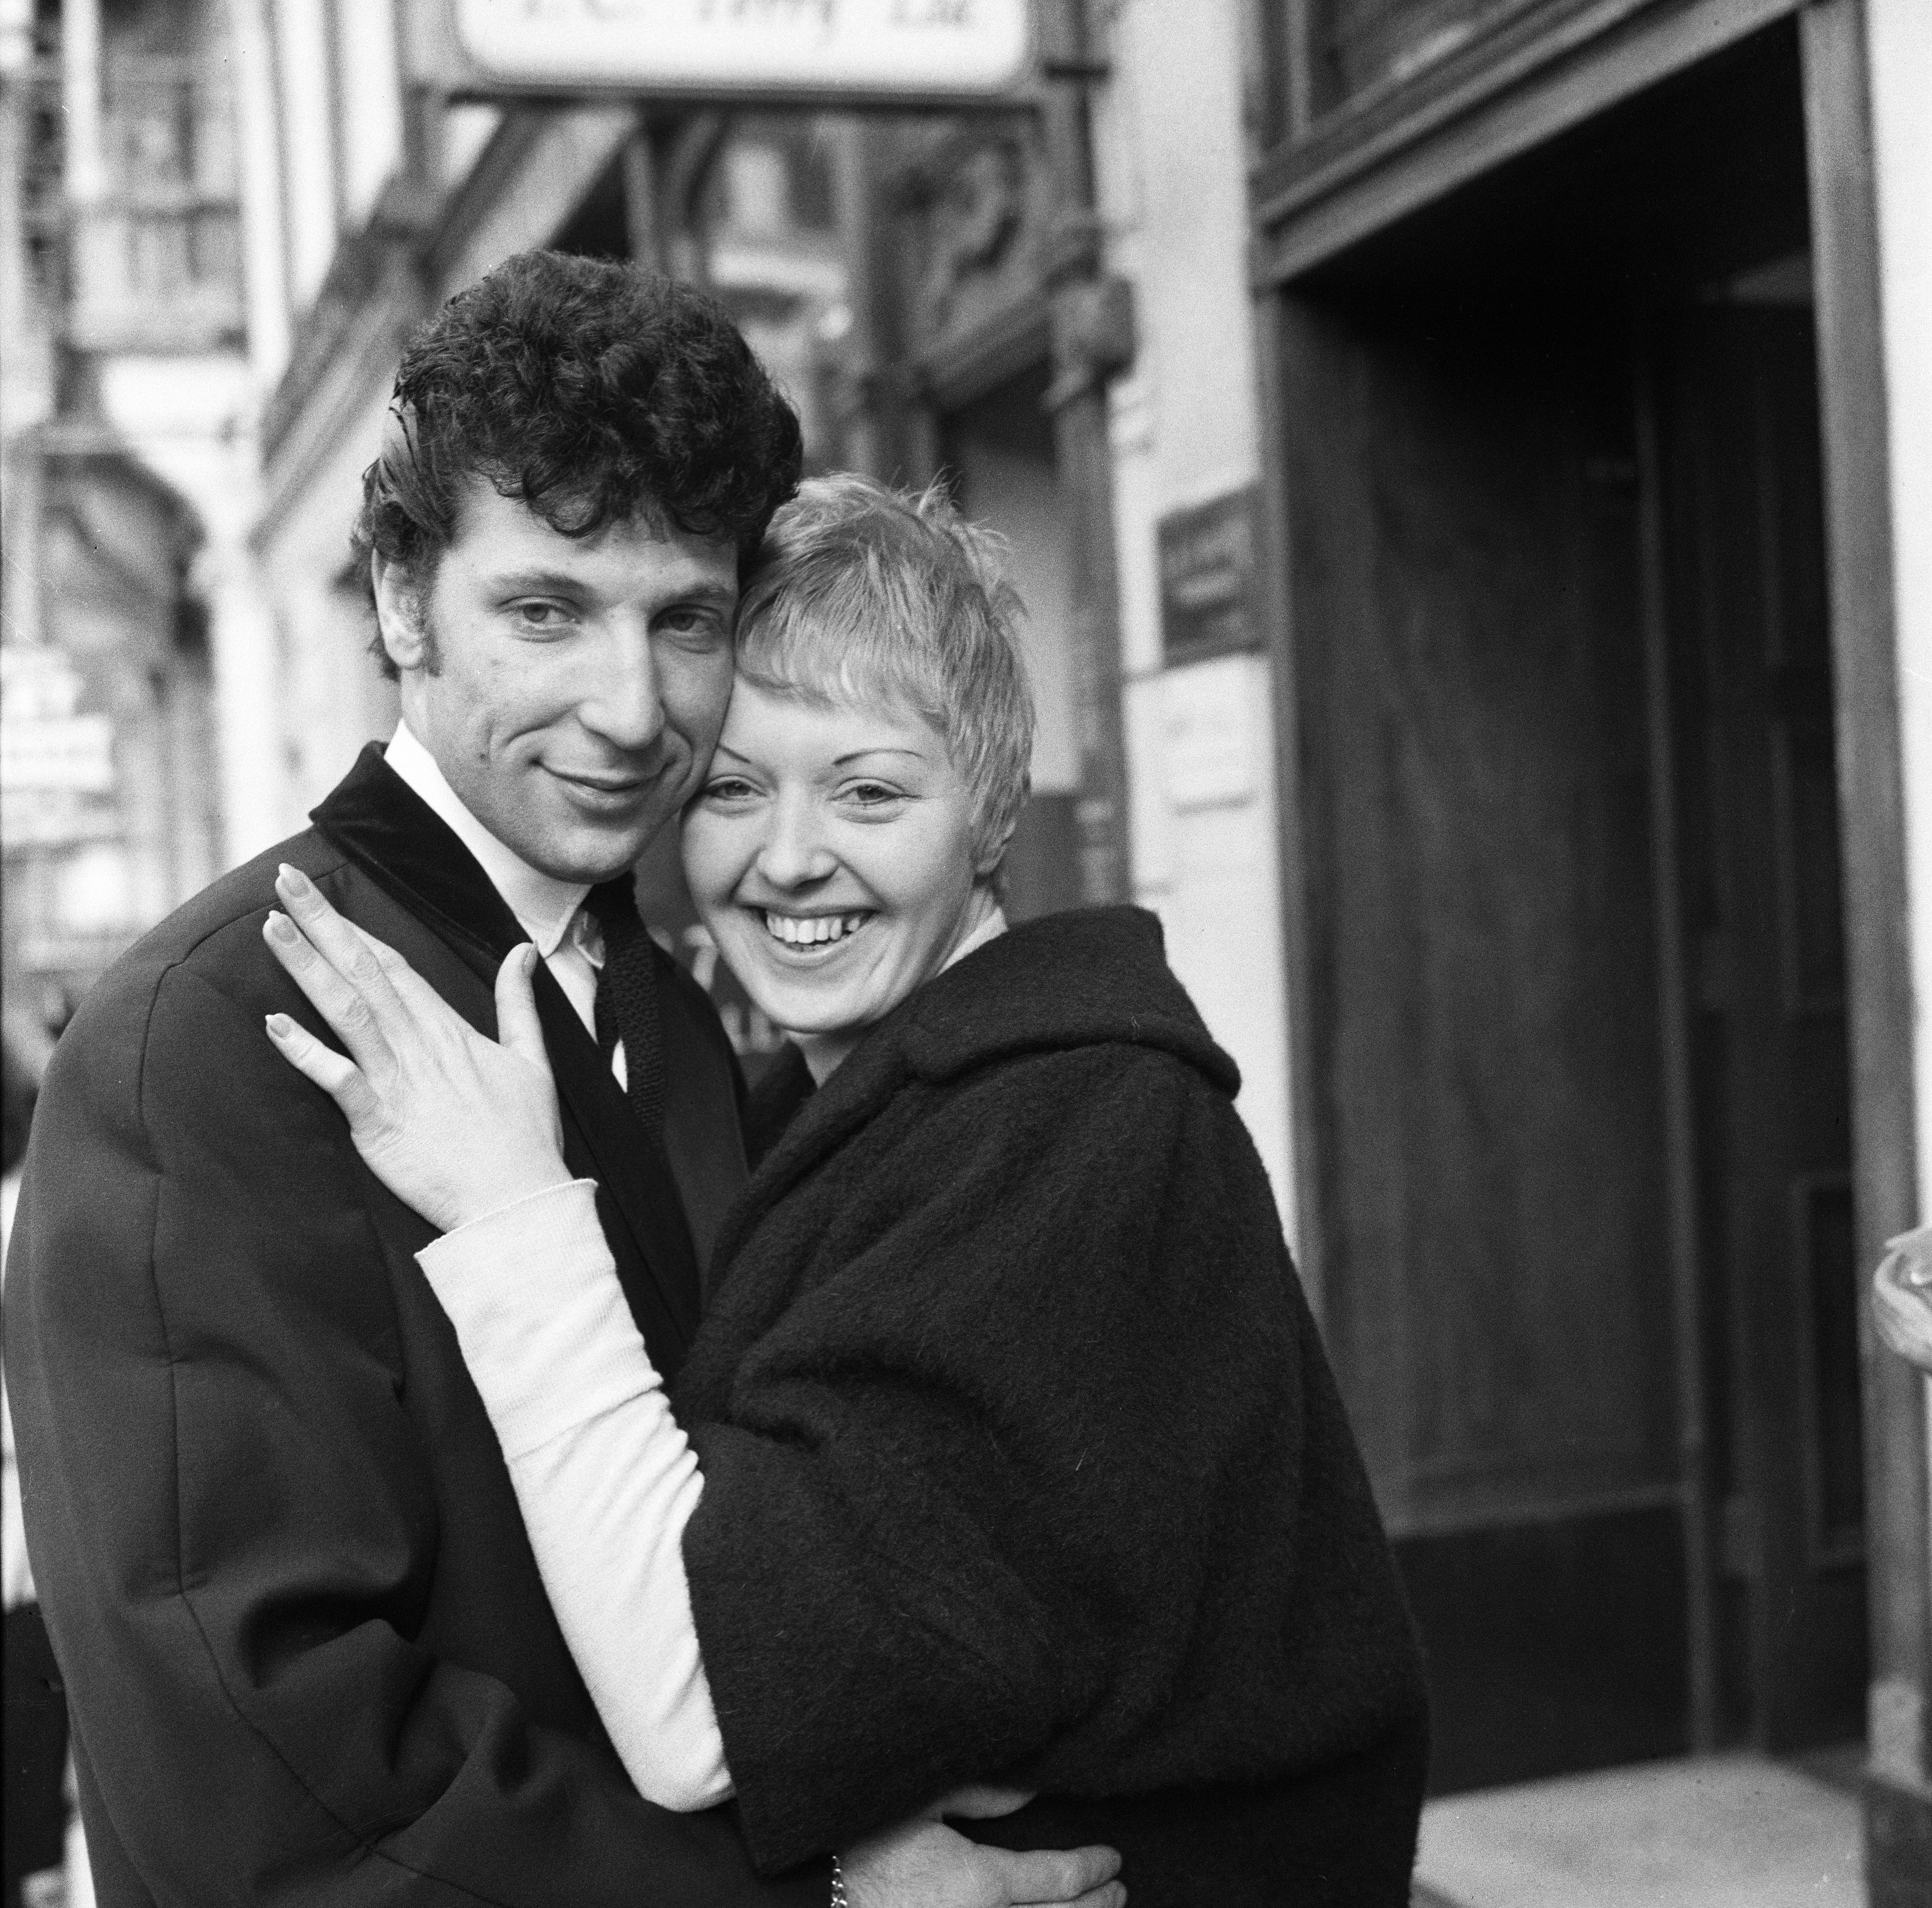 Tom Jones and Linda Trenchard house hunting in London in March 1965 | Source: Getty Images